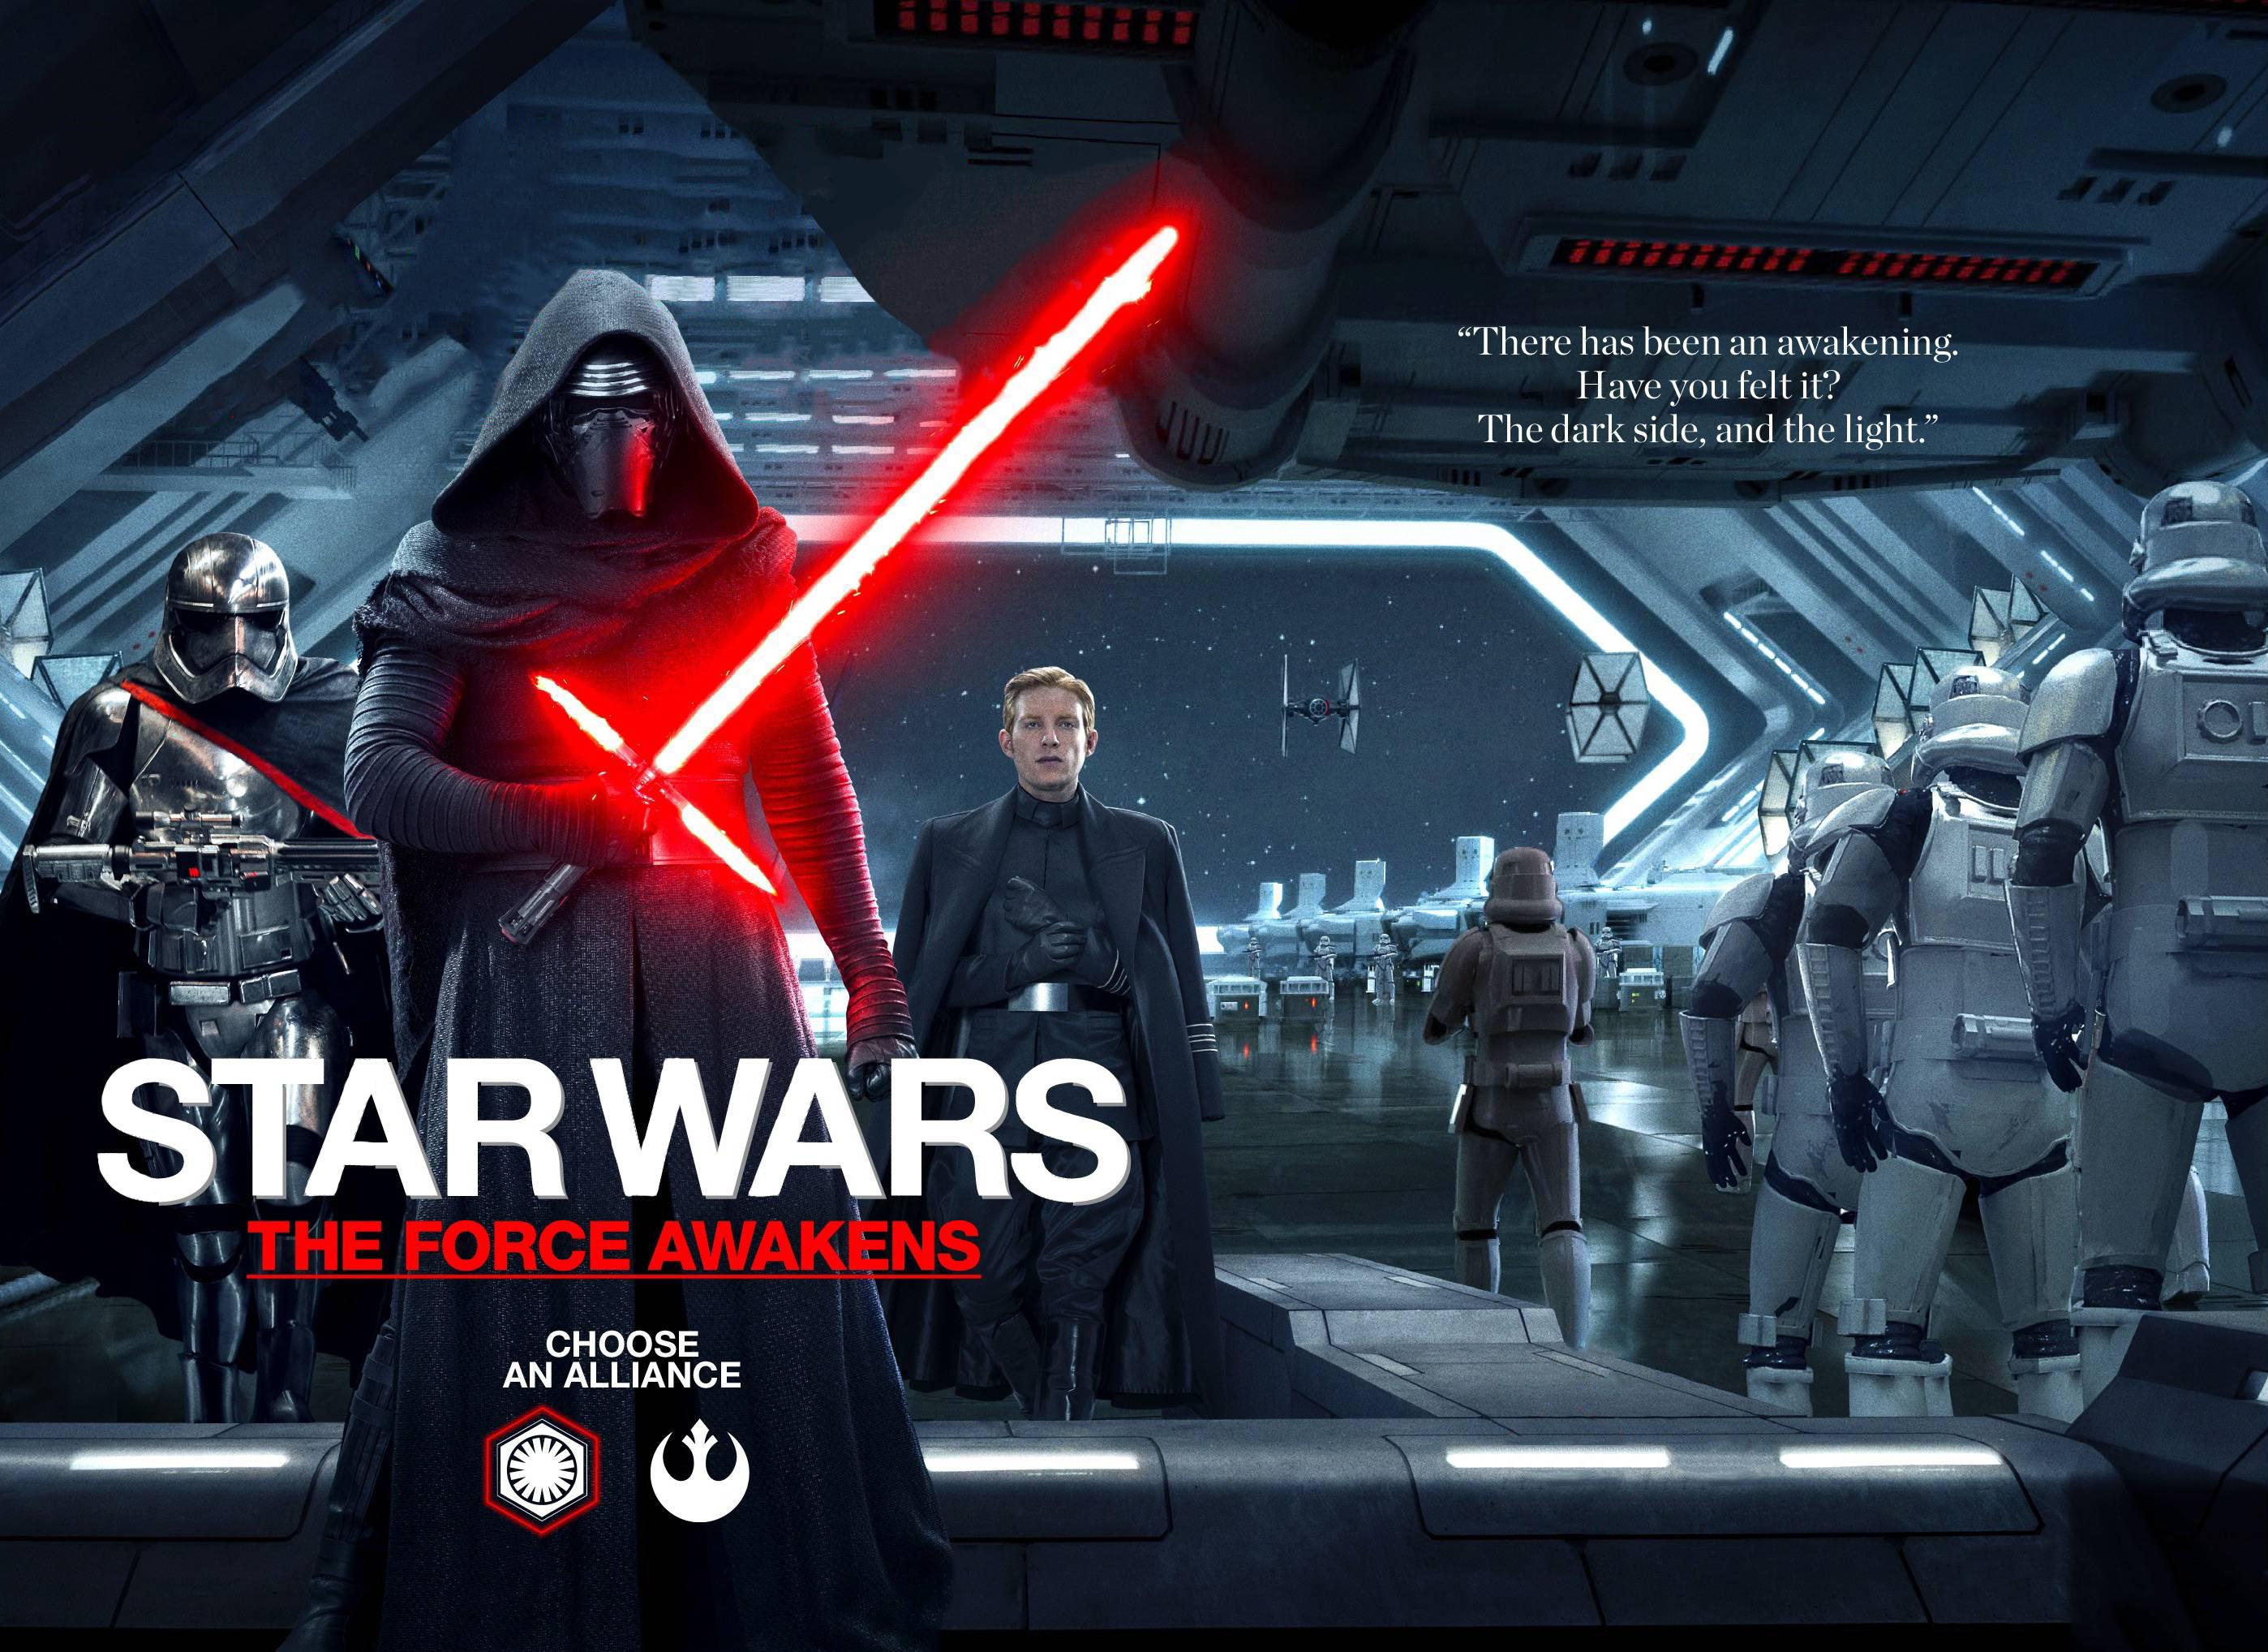 Star Wars: The Force Awakens Empire Magazine Covers (Wallpaper ...